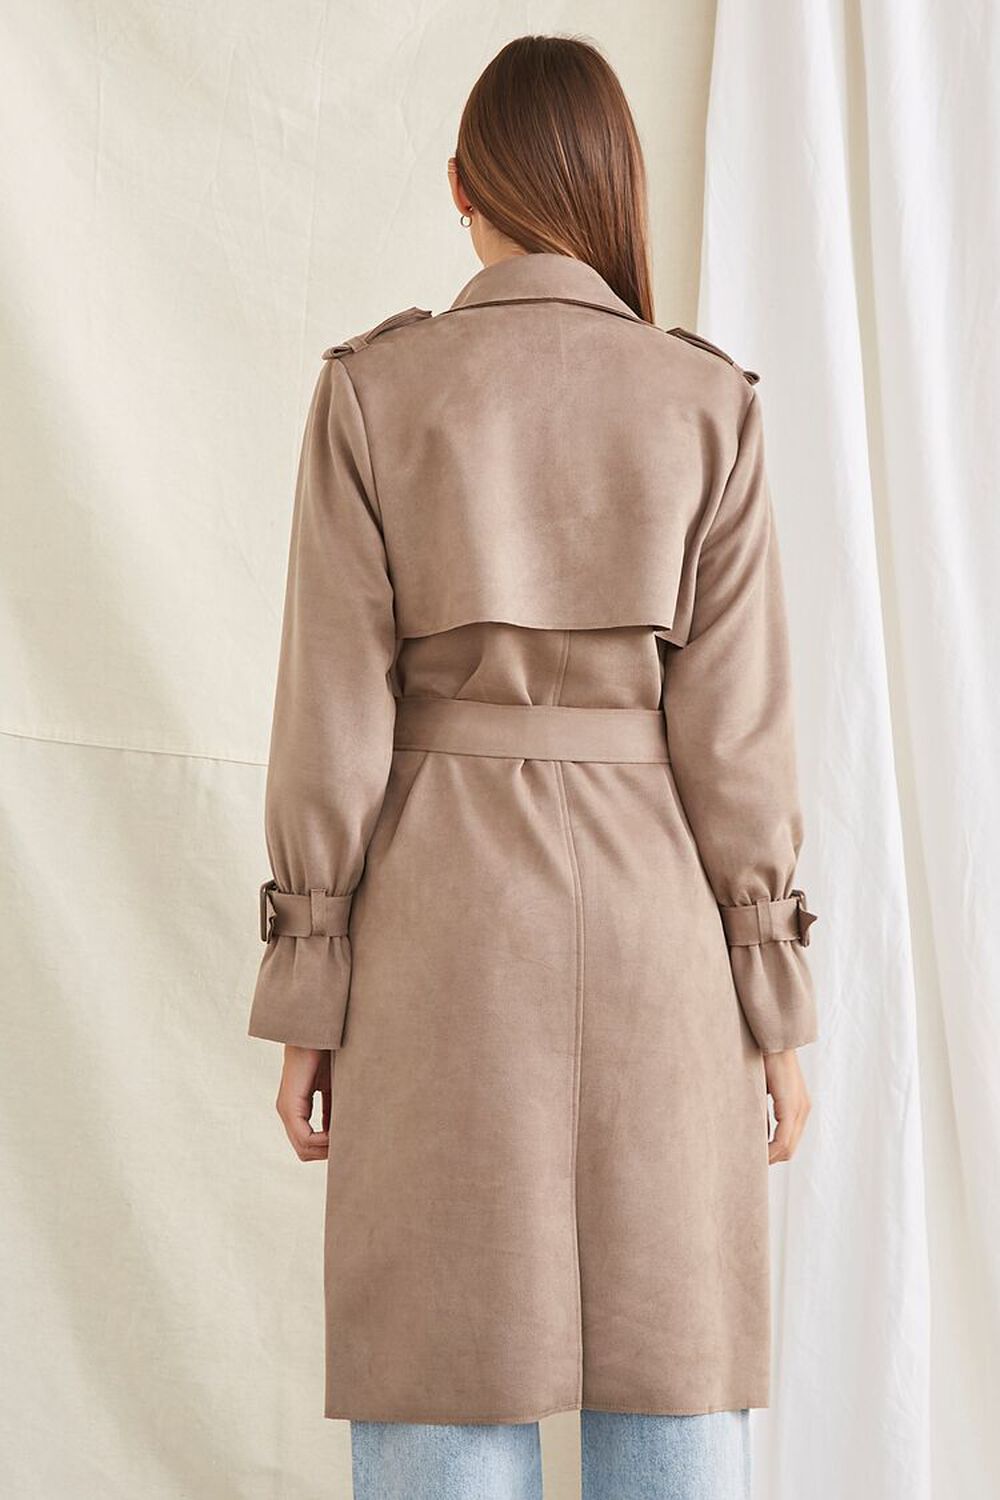 Belted Faux Suede Trench Jacket, image 3